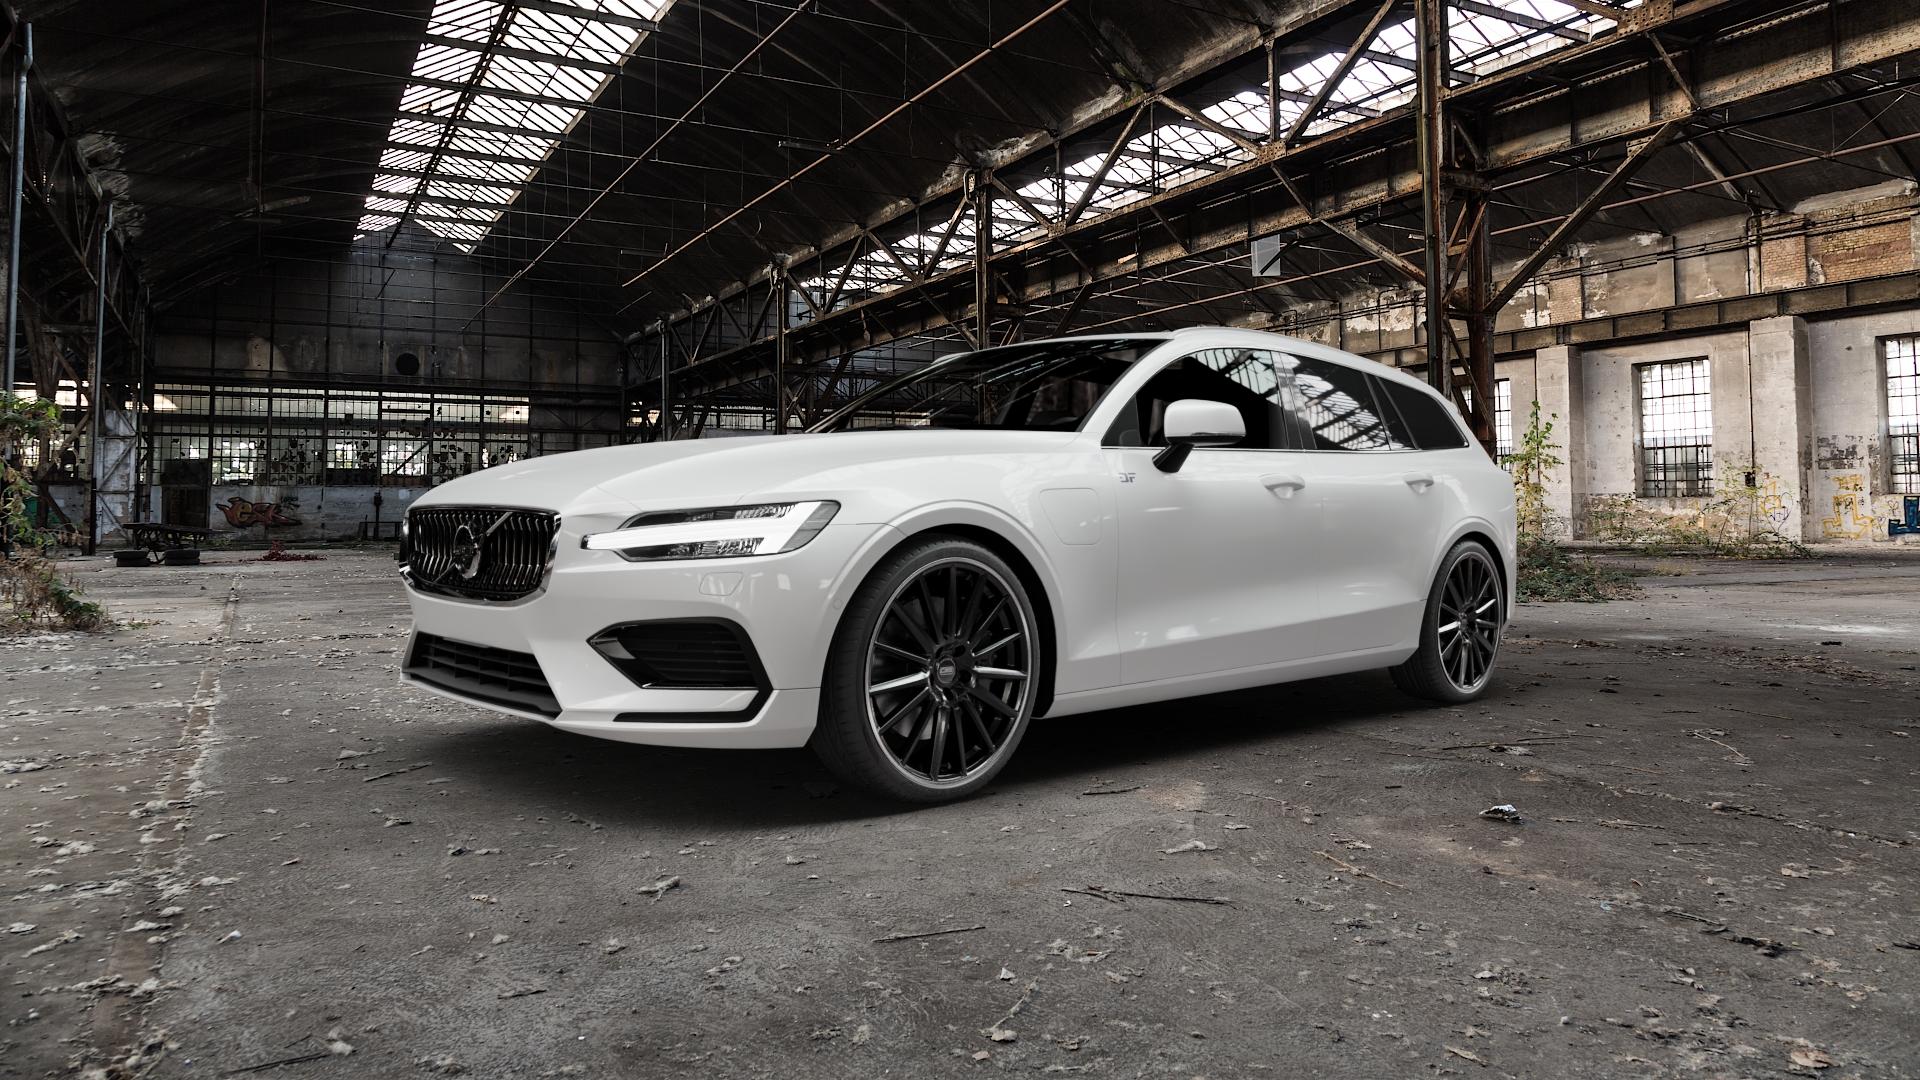 Volvo V60 Type Z 2,0l T6 AWD 240kW Polestar Performance (326 hp) Wheels and  Tyre Packages